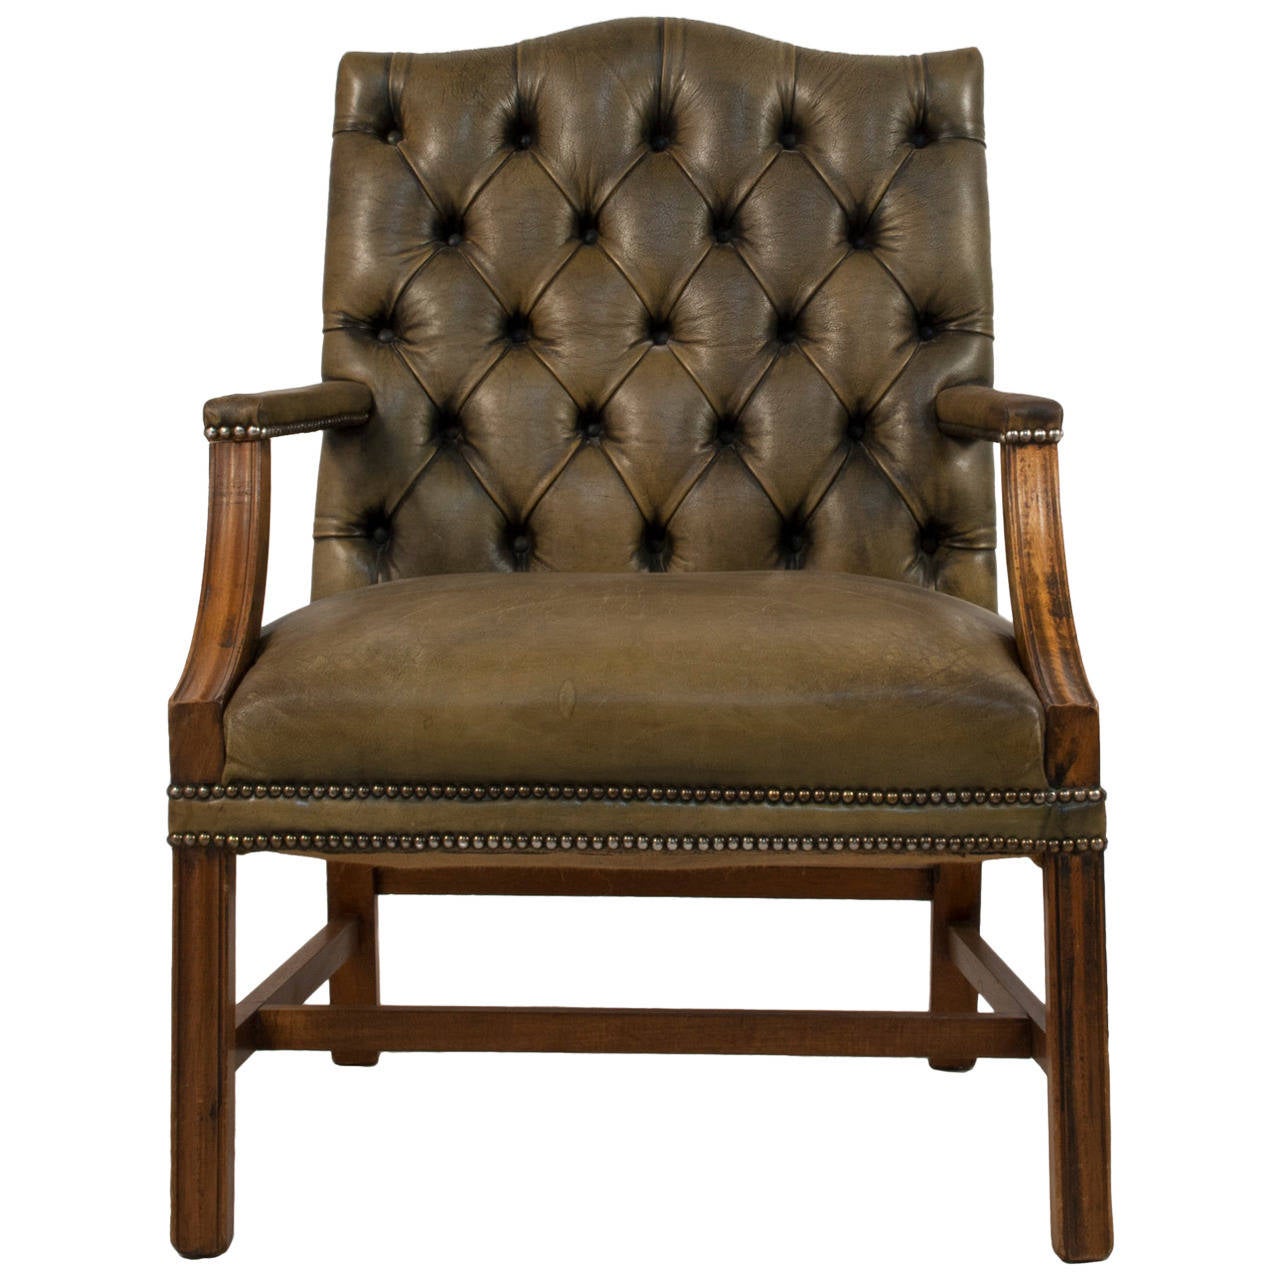 Tufted Leather Armchair For Sale at 1stdibs